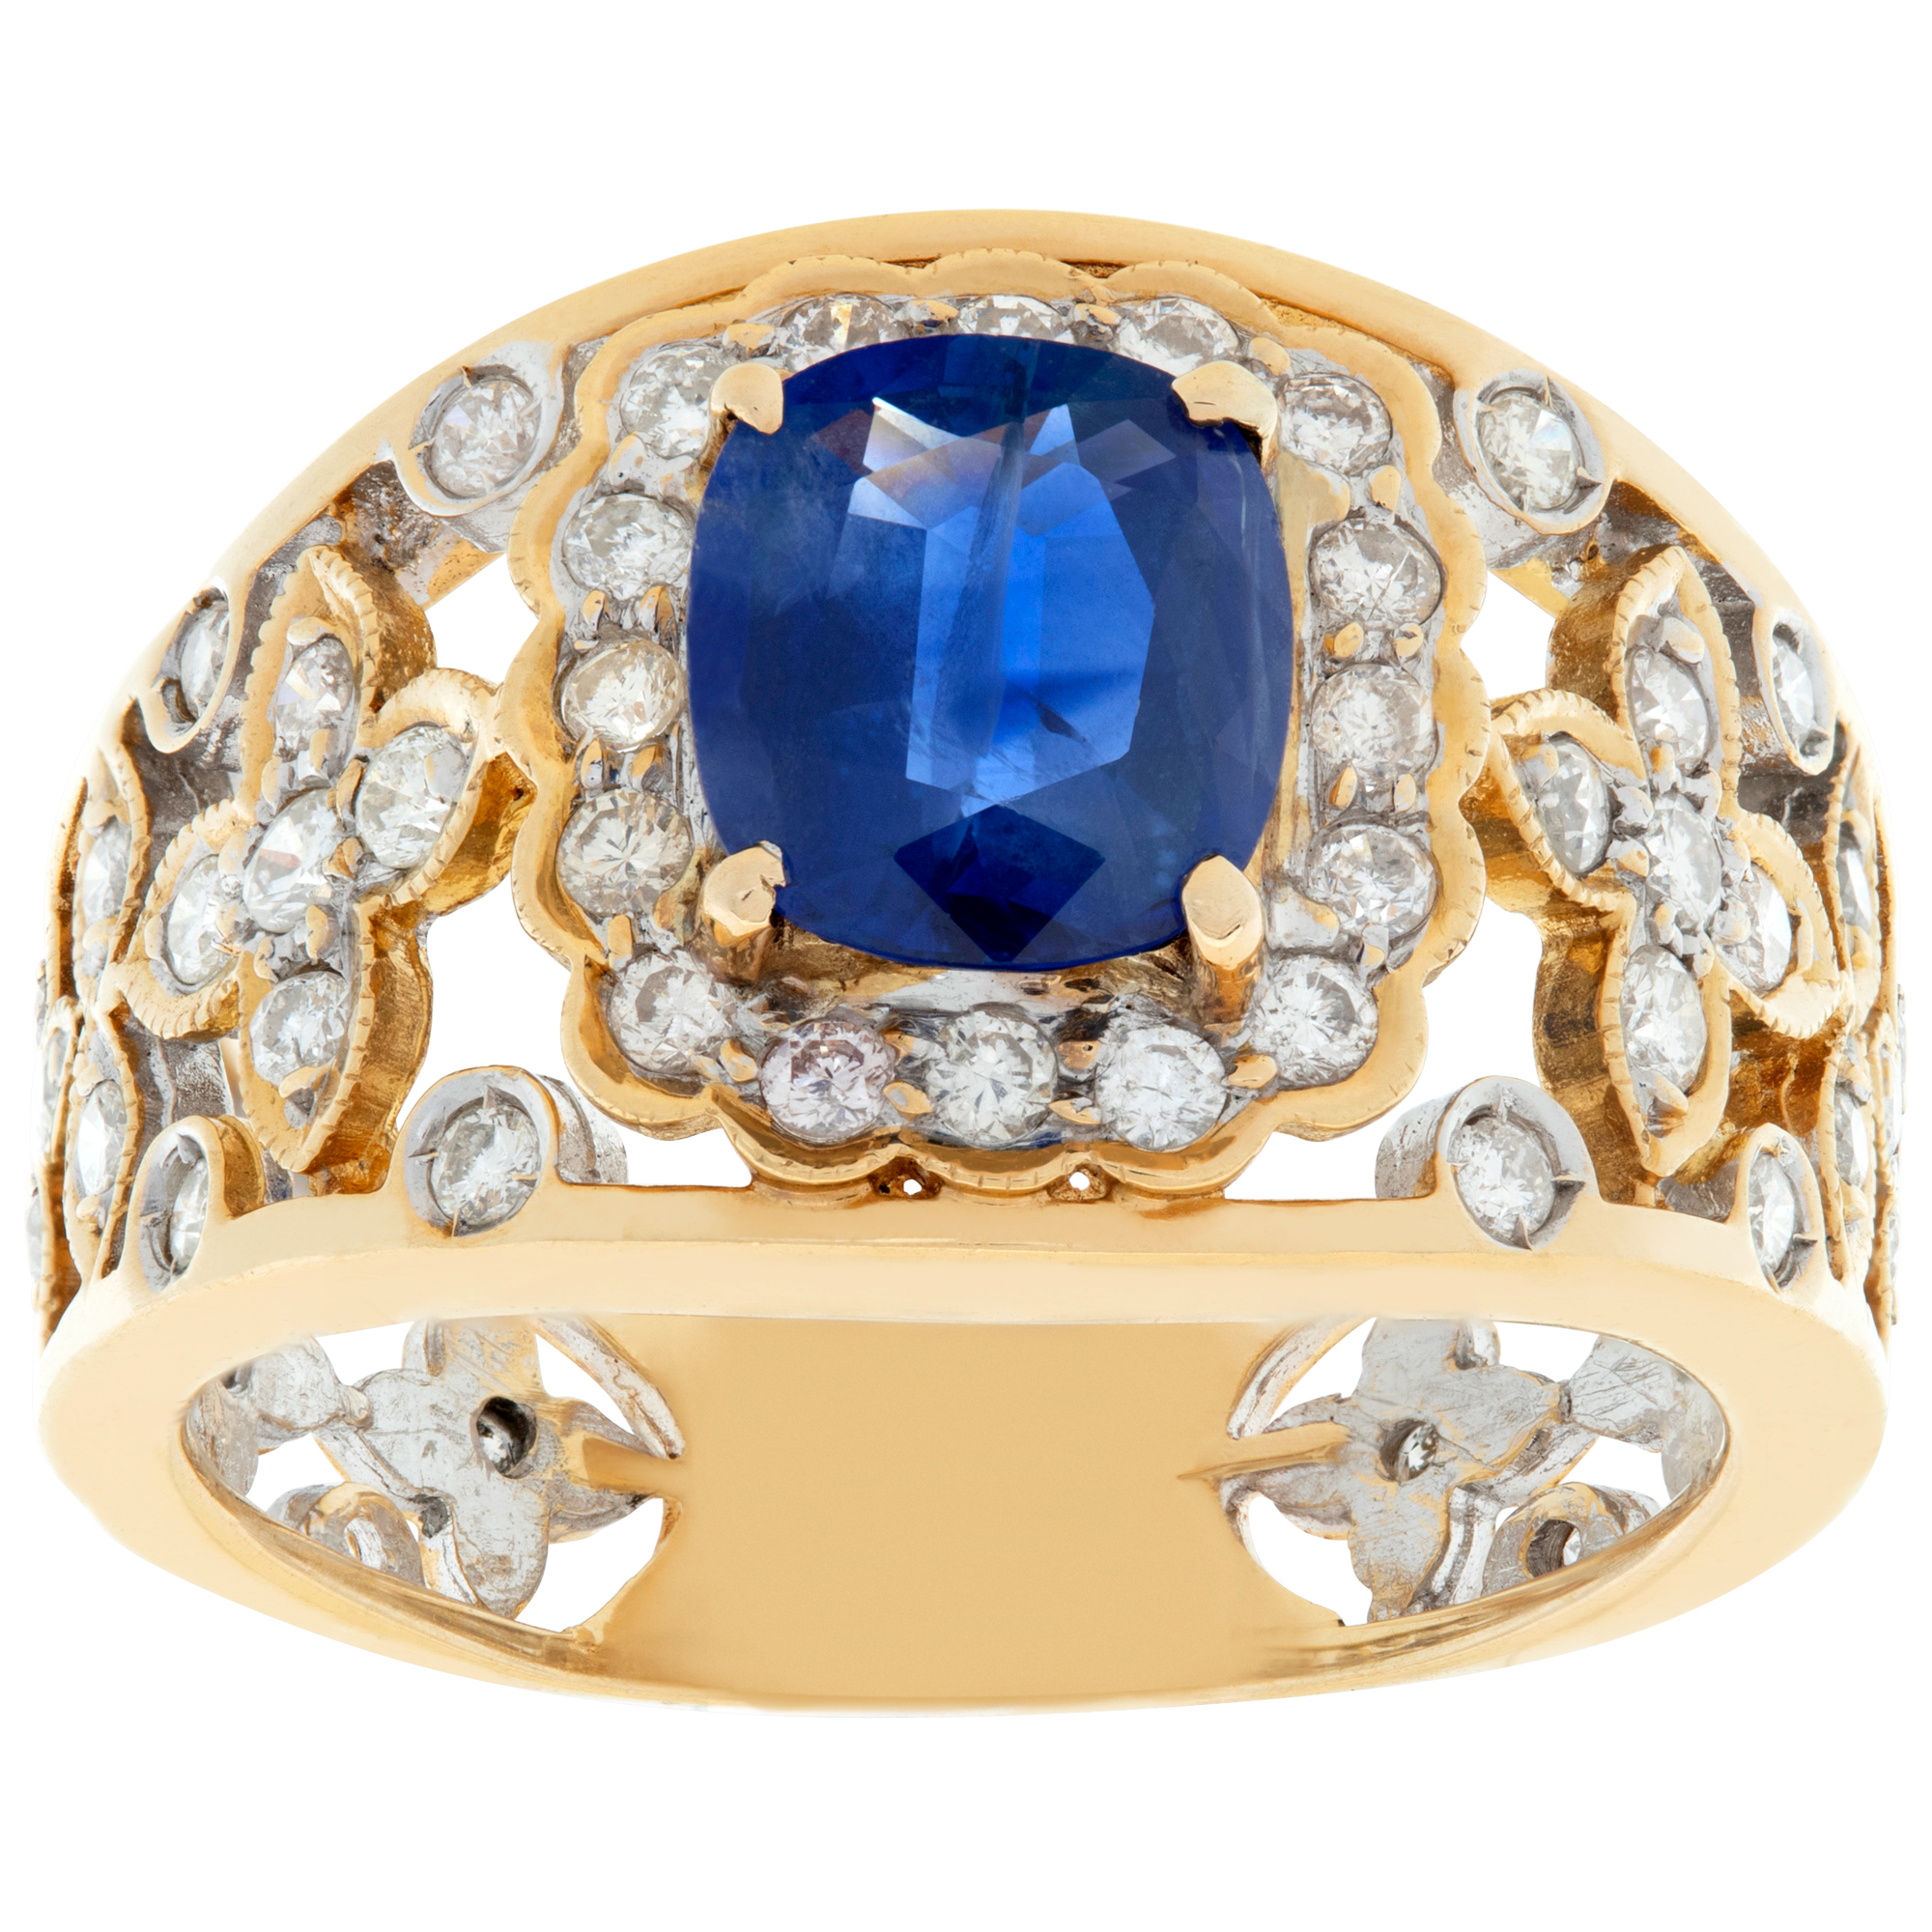 Sweet sapphire flower design ring in 18k with 0.40 cts in diamond accents. Size 7